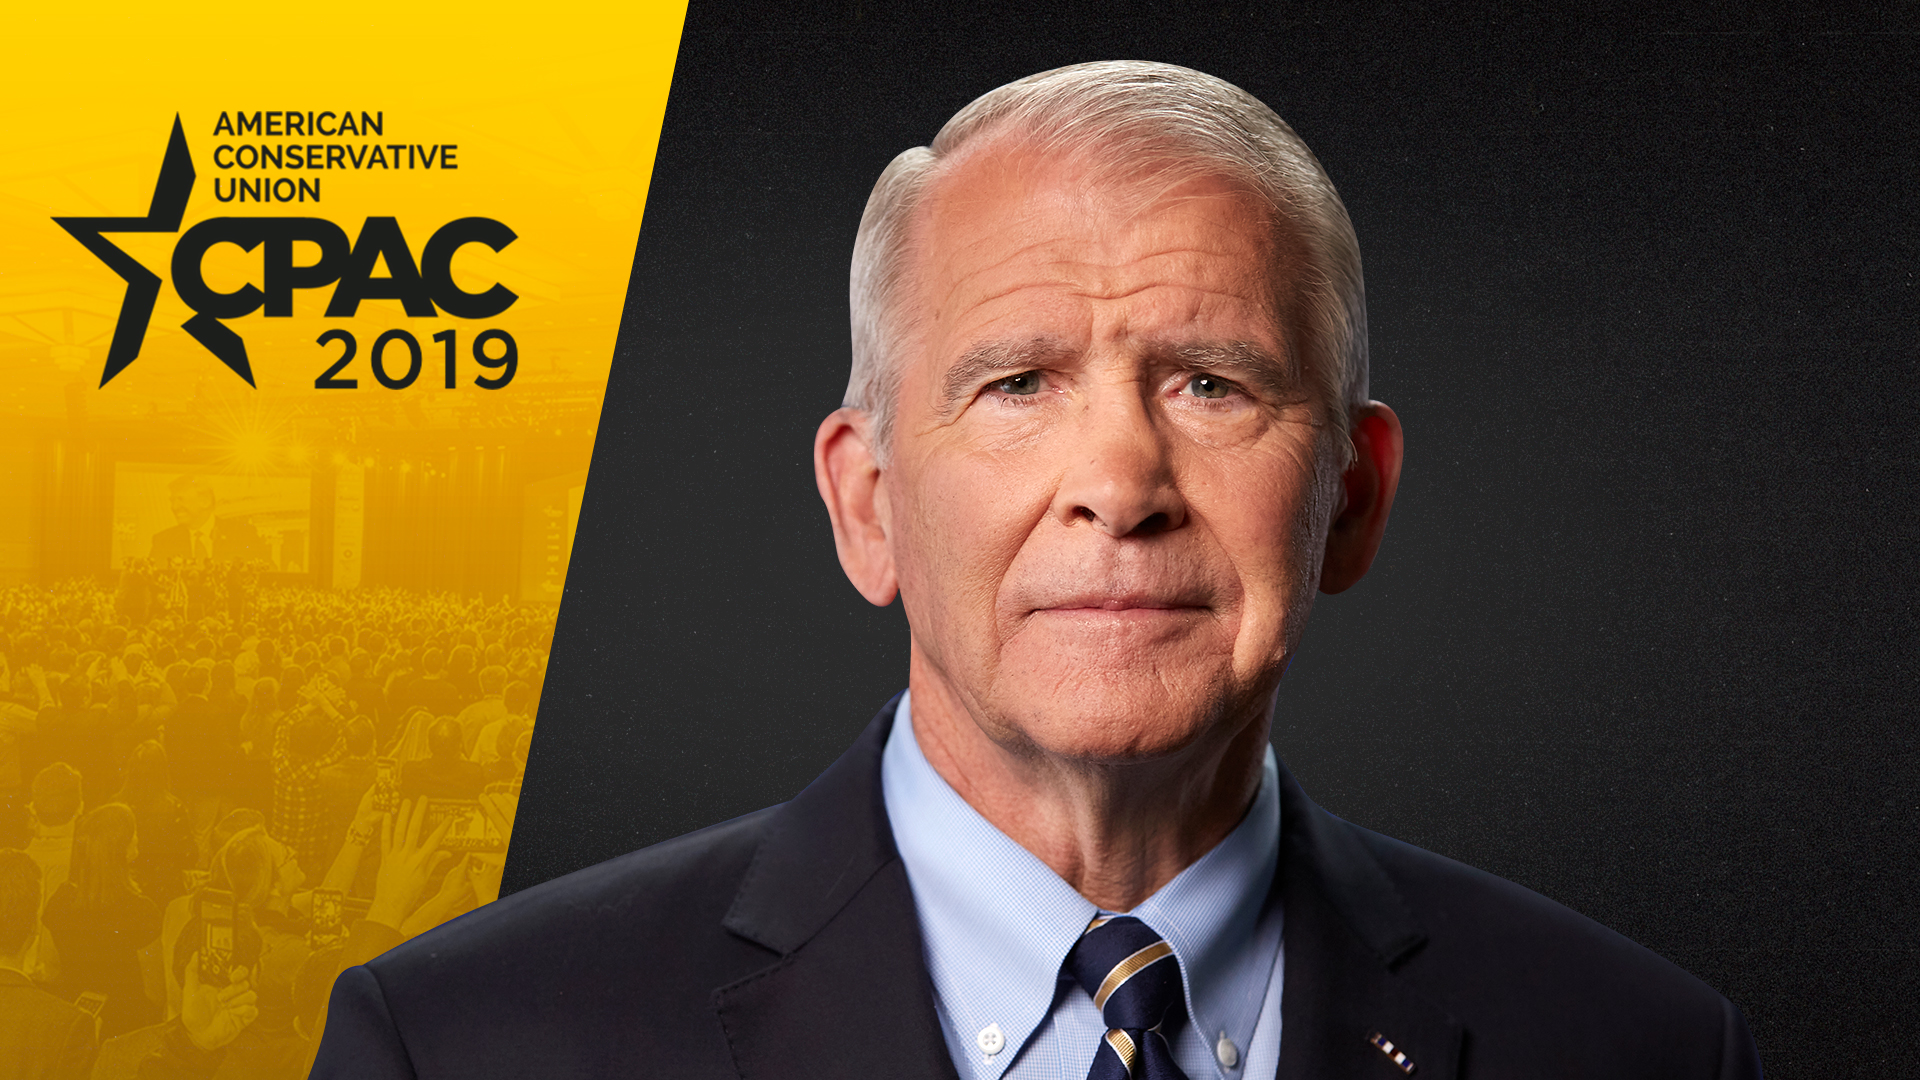 WATCH ▶ LtCol Oliver North's Speech at CPAC